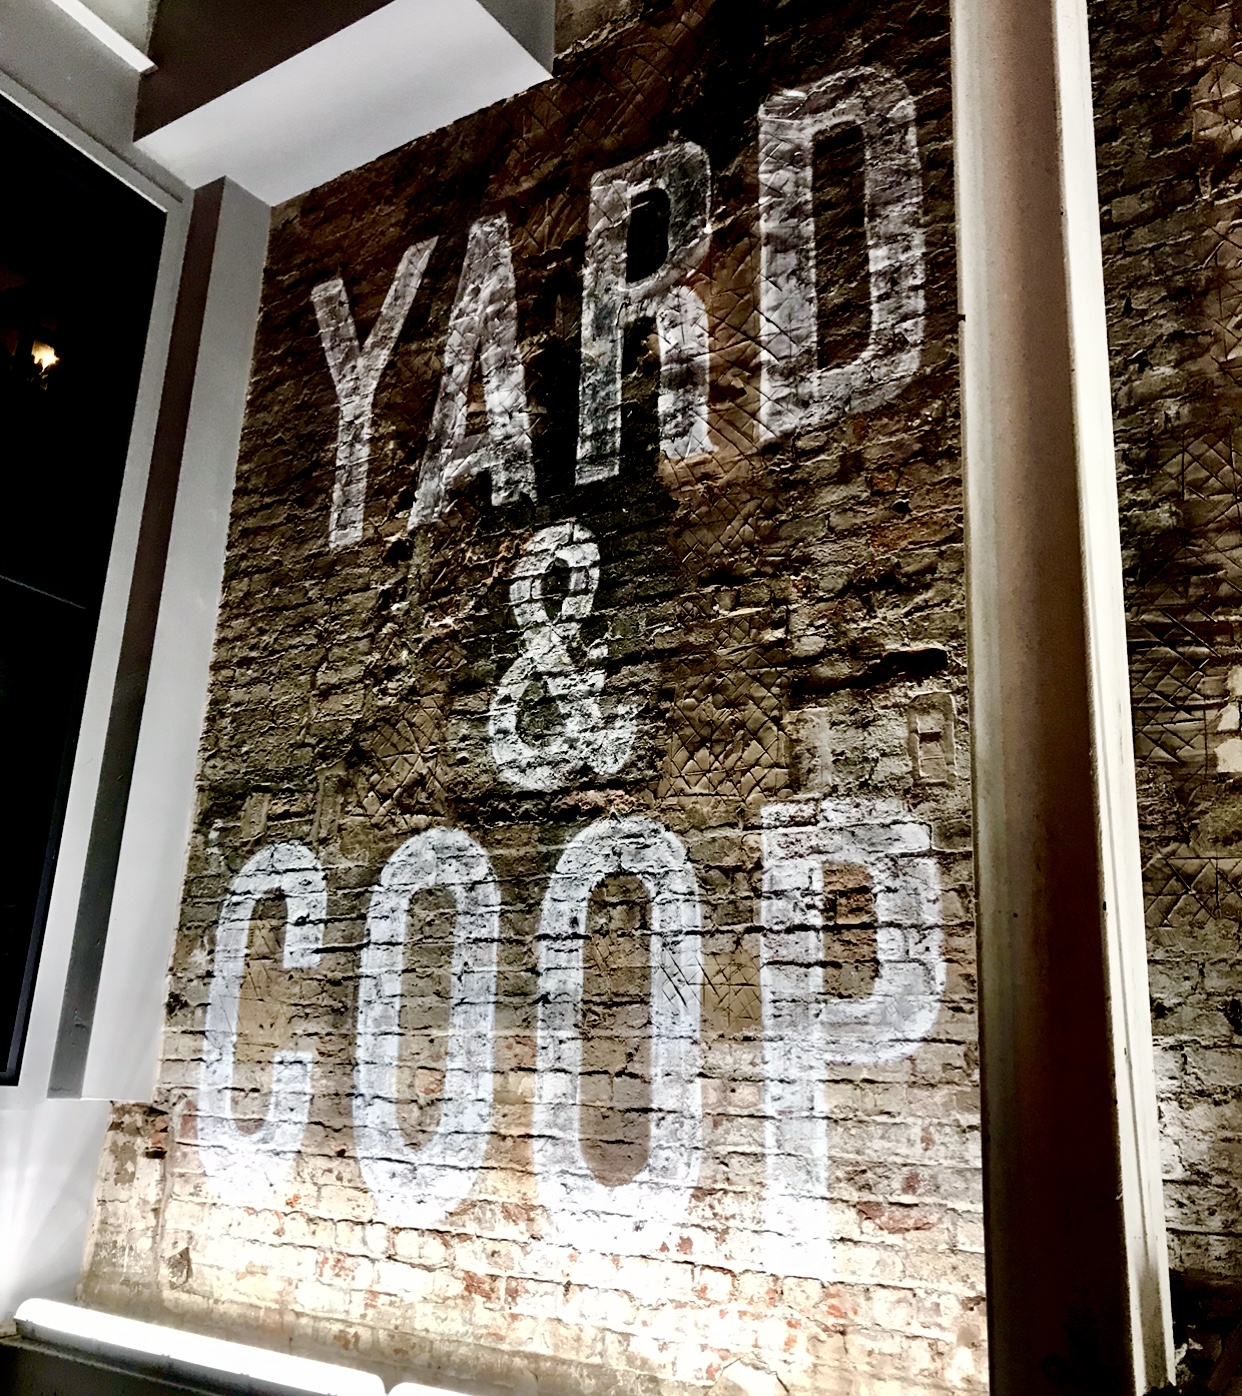 Yard & Coop Menu – With Meat Free Monday Options